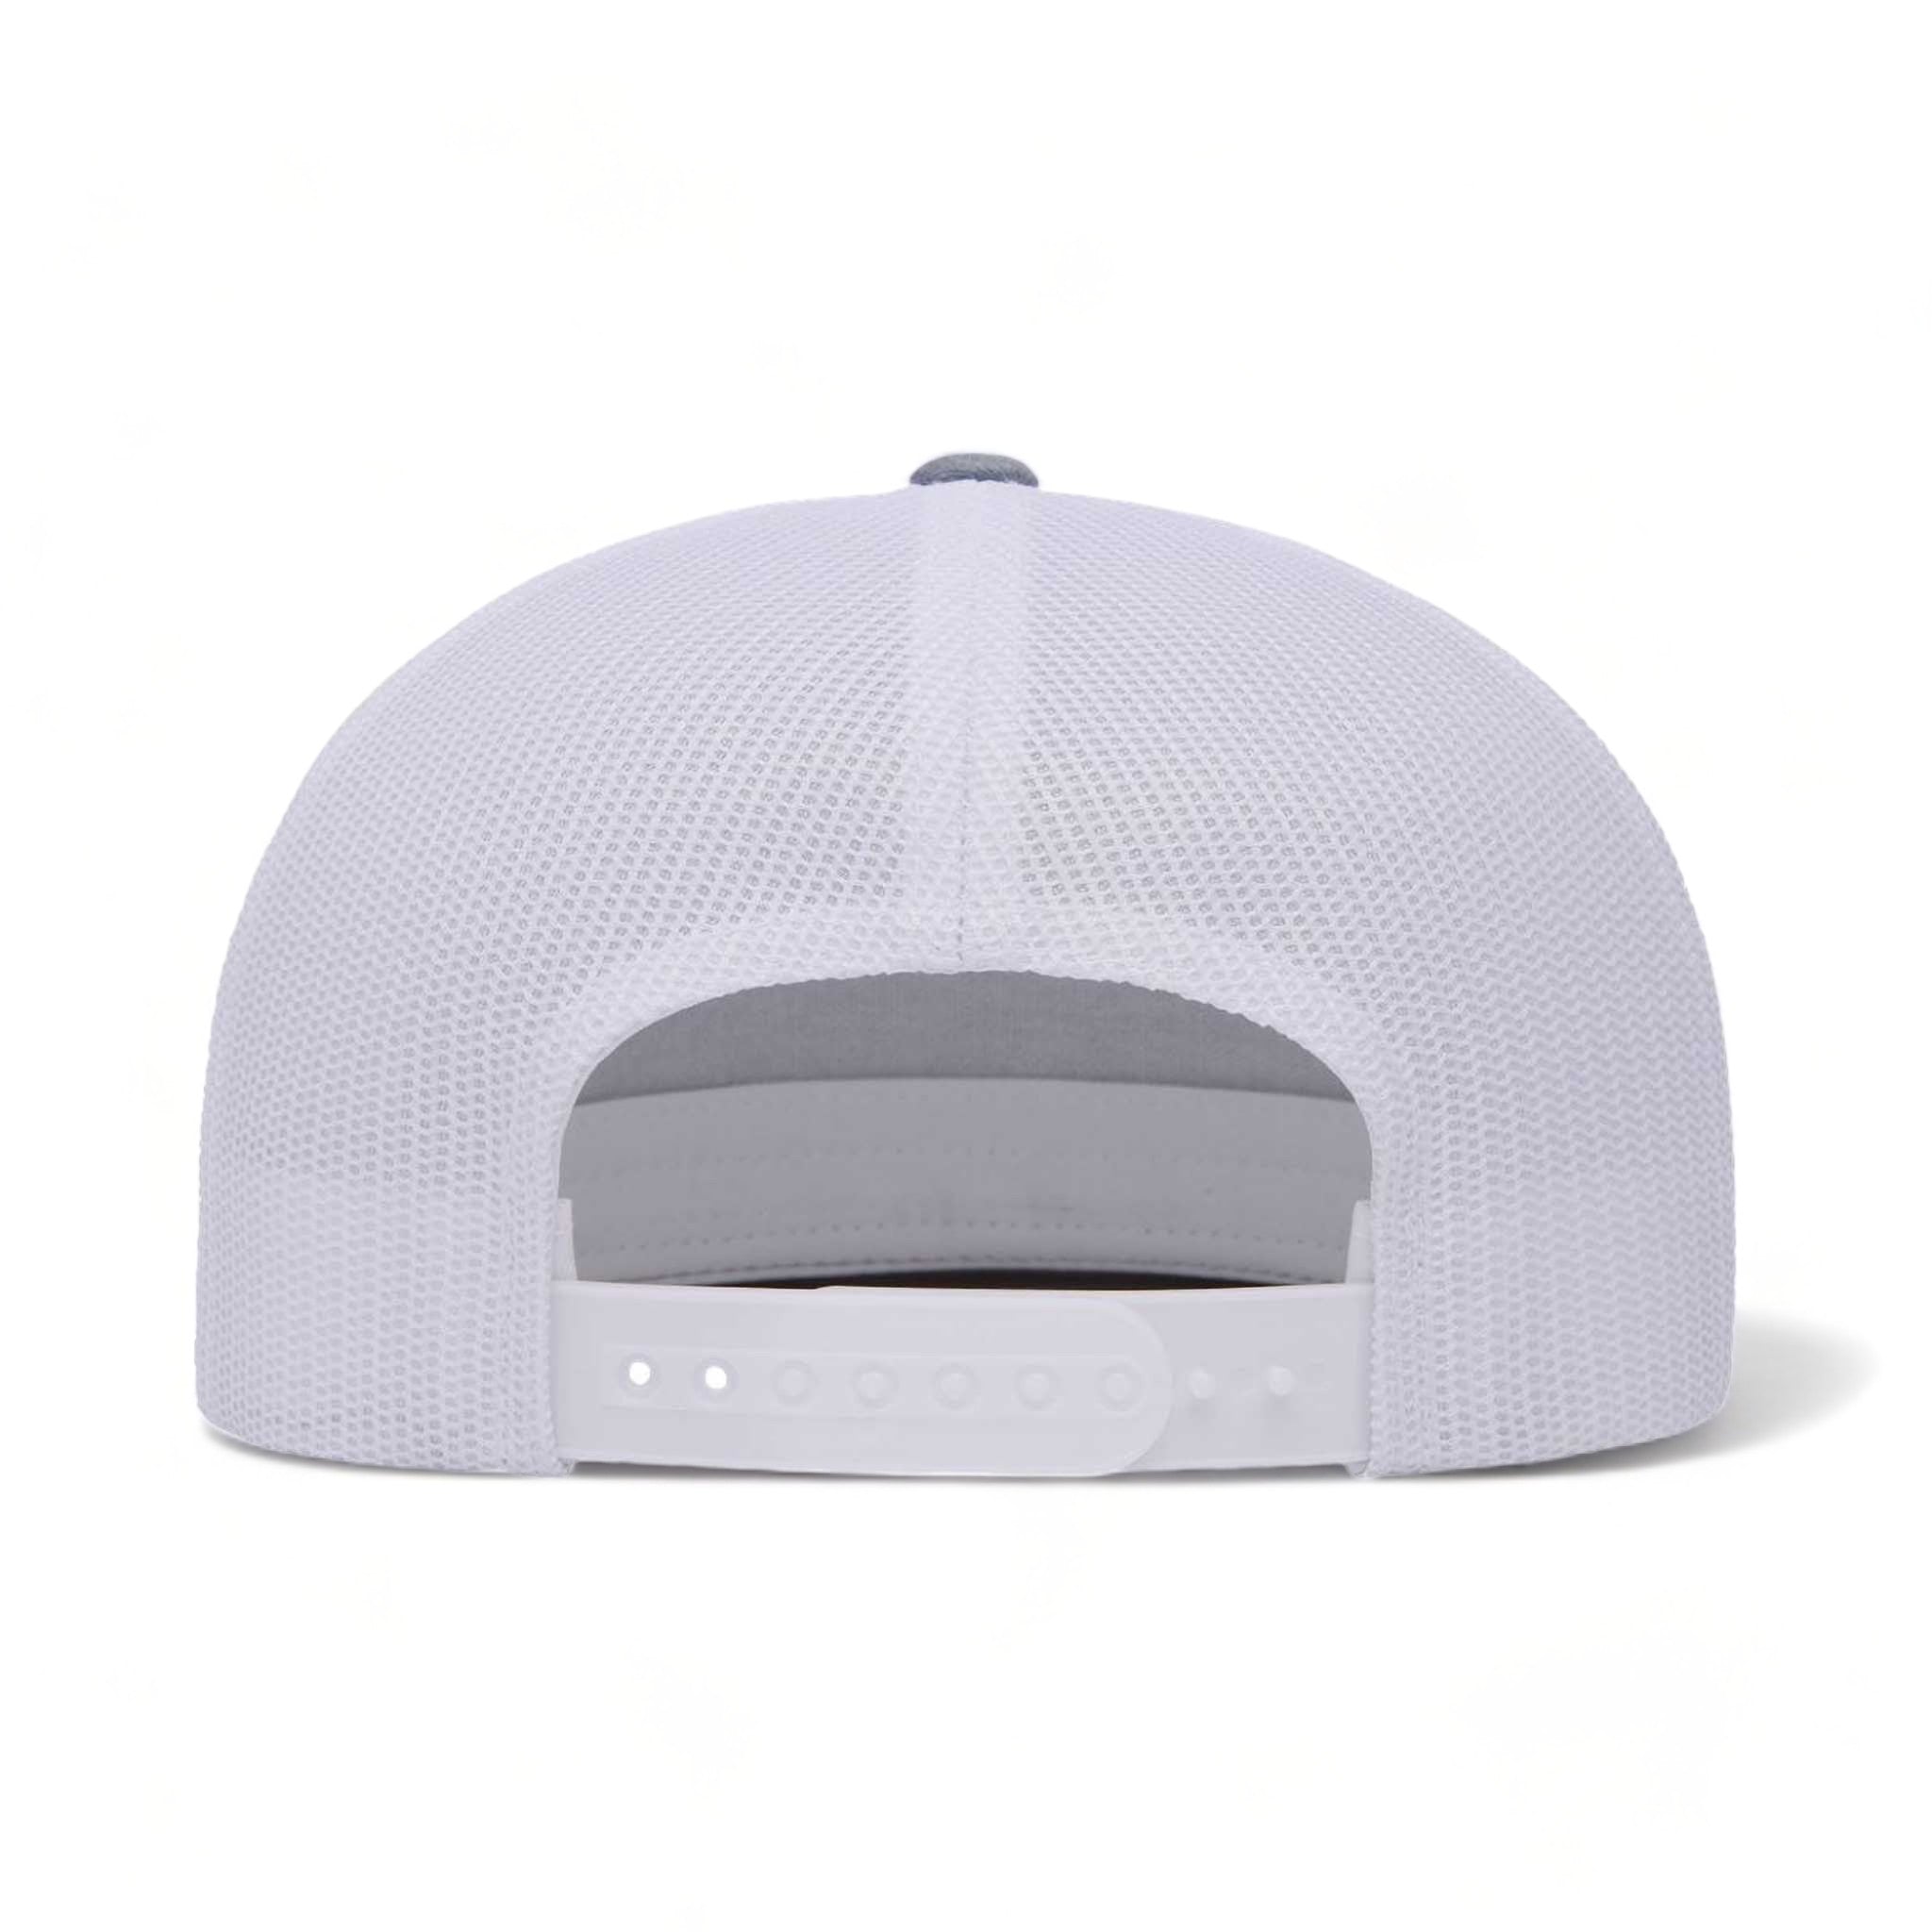 Back view of YP Classics 6006 custom hat in heather and white